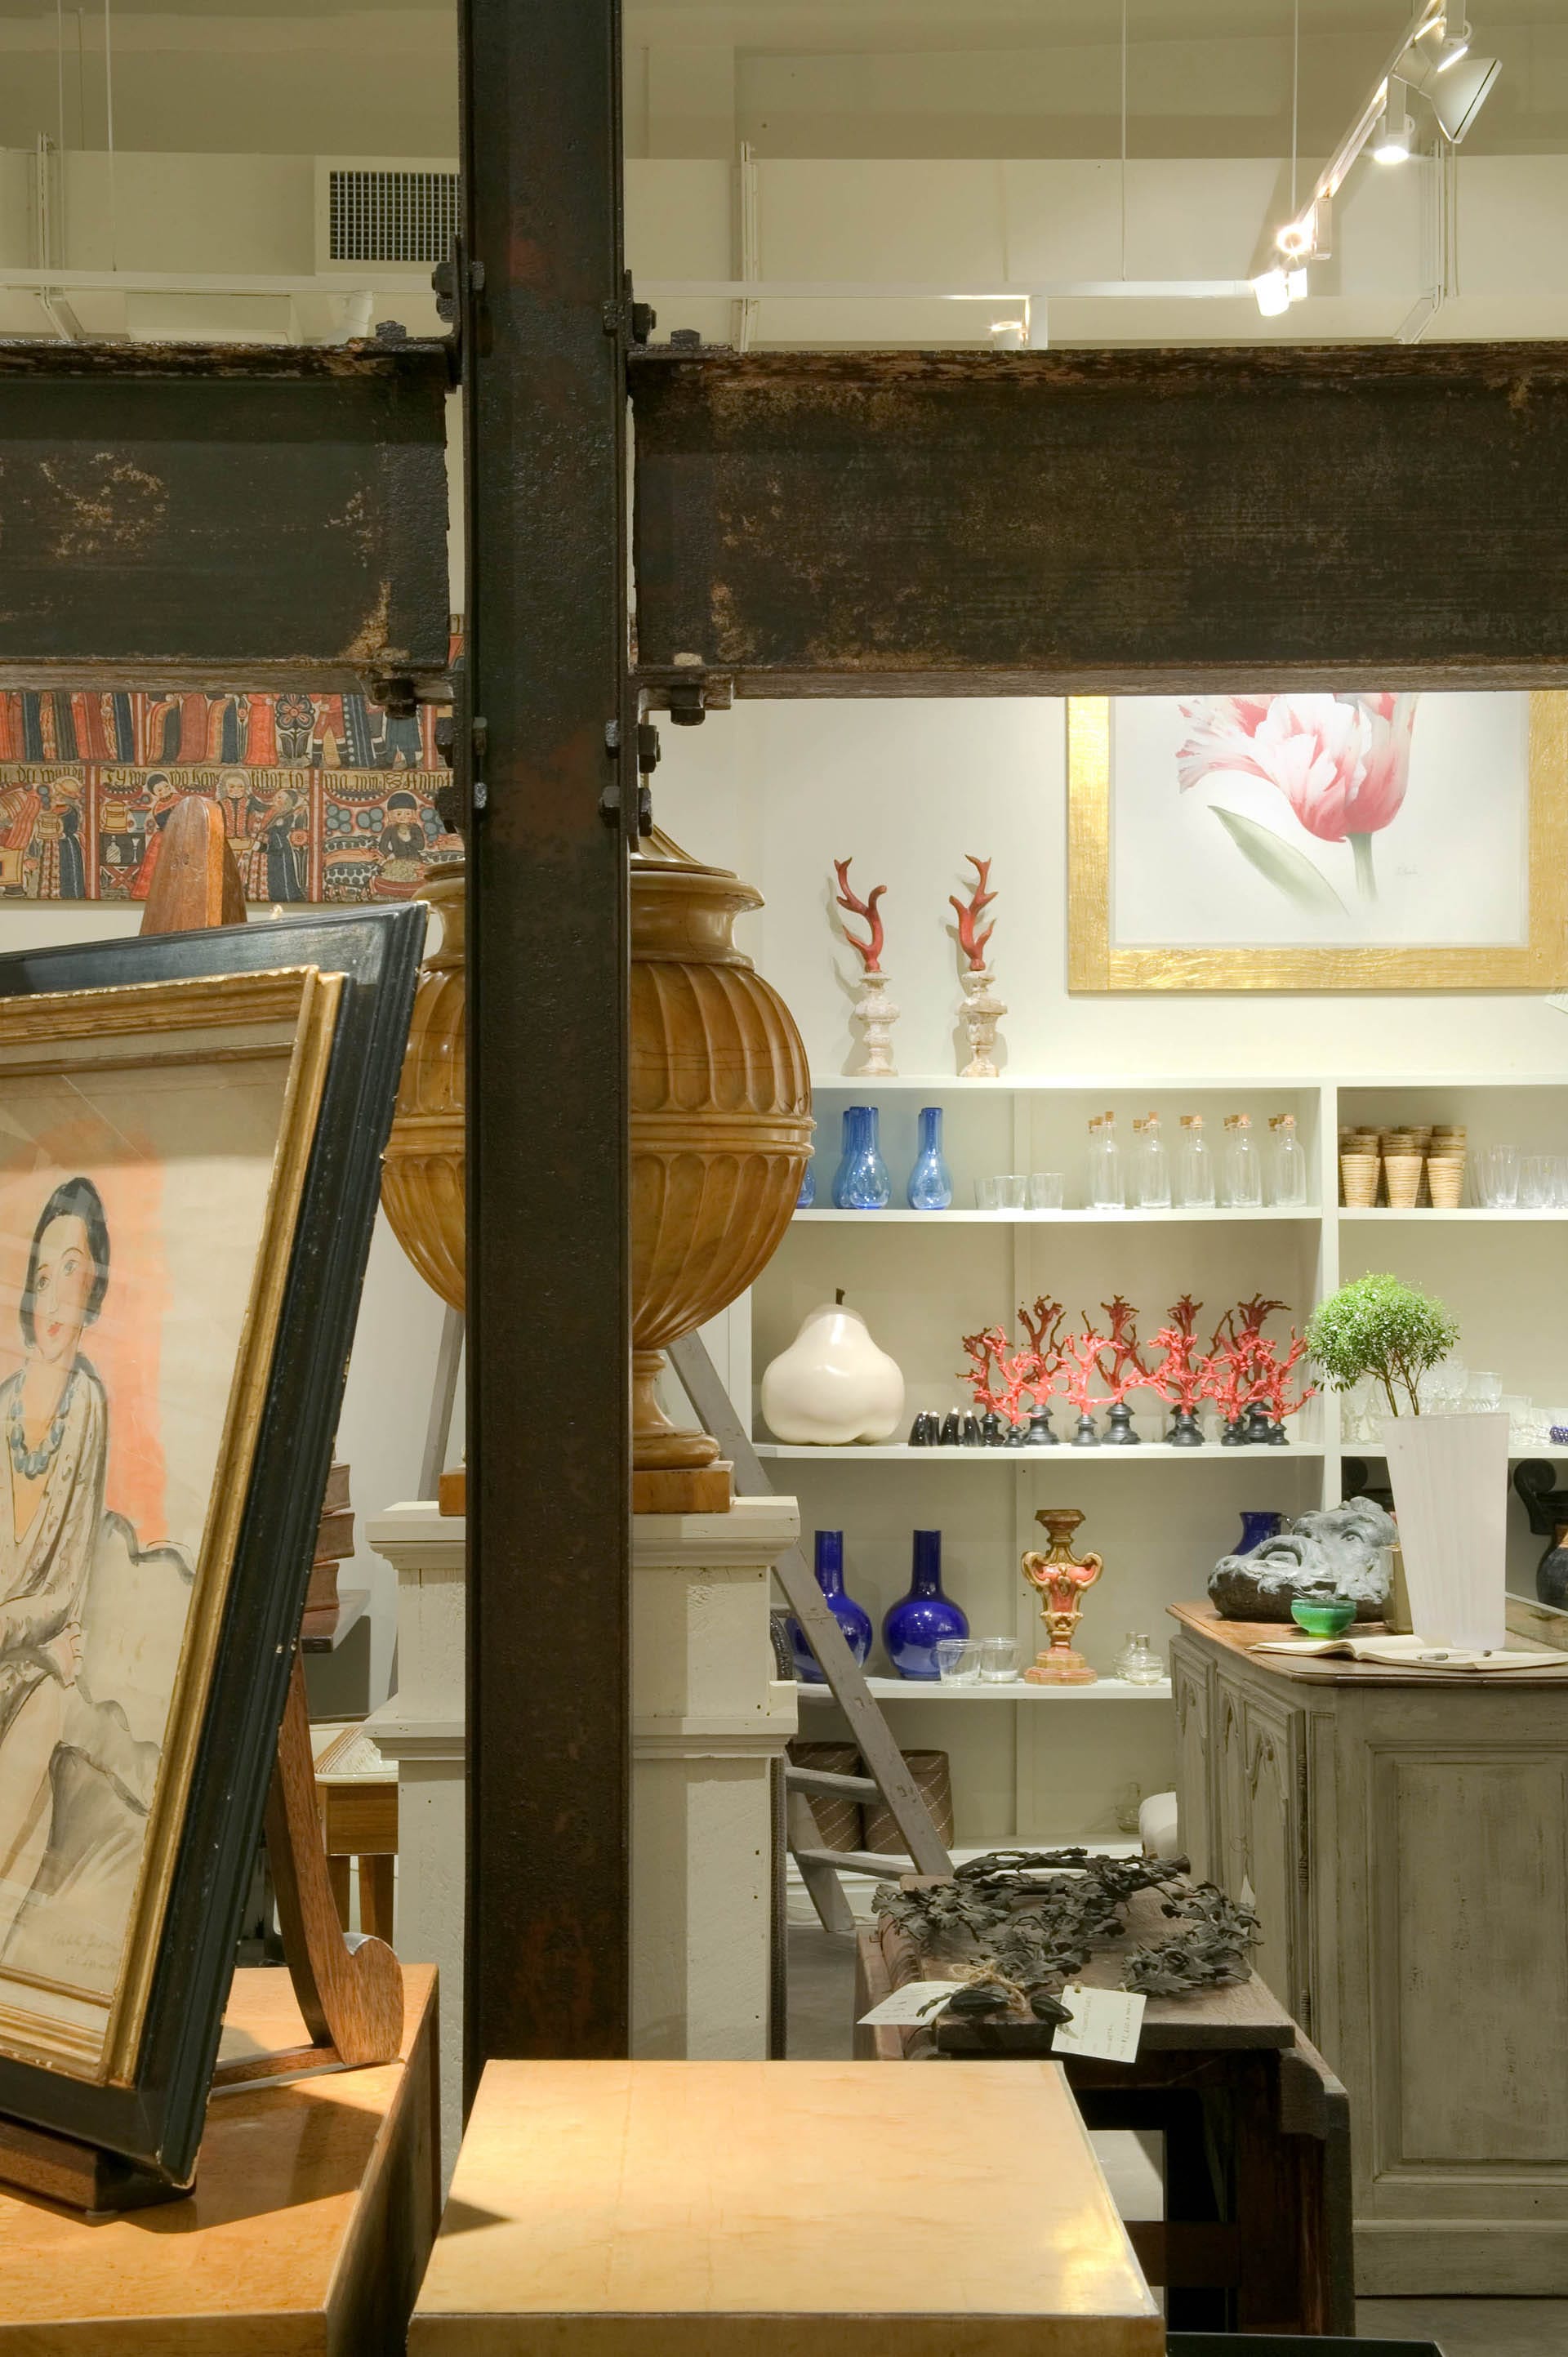 At the foreground, a wood table holds merchandise in an antique store. Beyond that sit decorative and supportive aged metal beams. In the background, a set of shelves holds antique glassware and decorative objects.